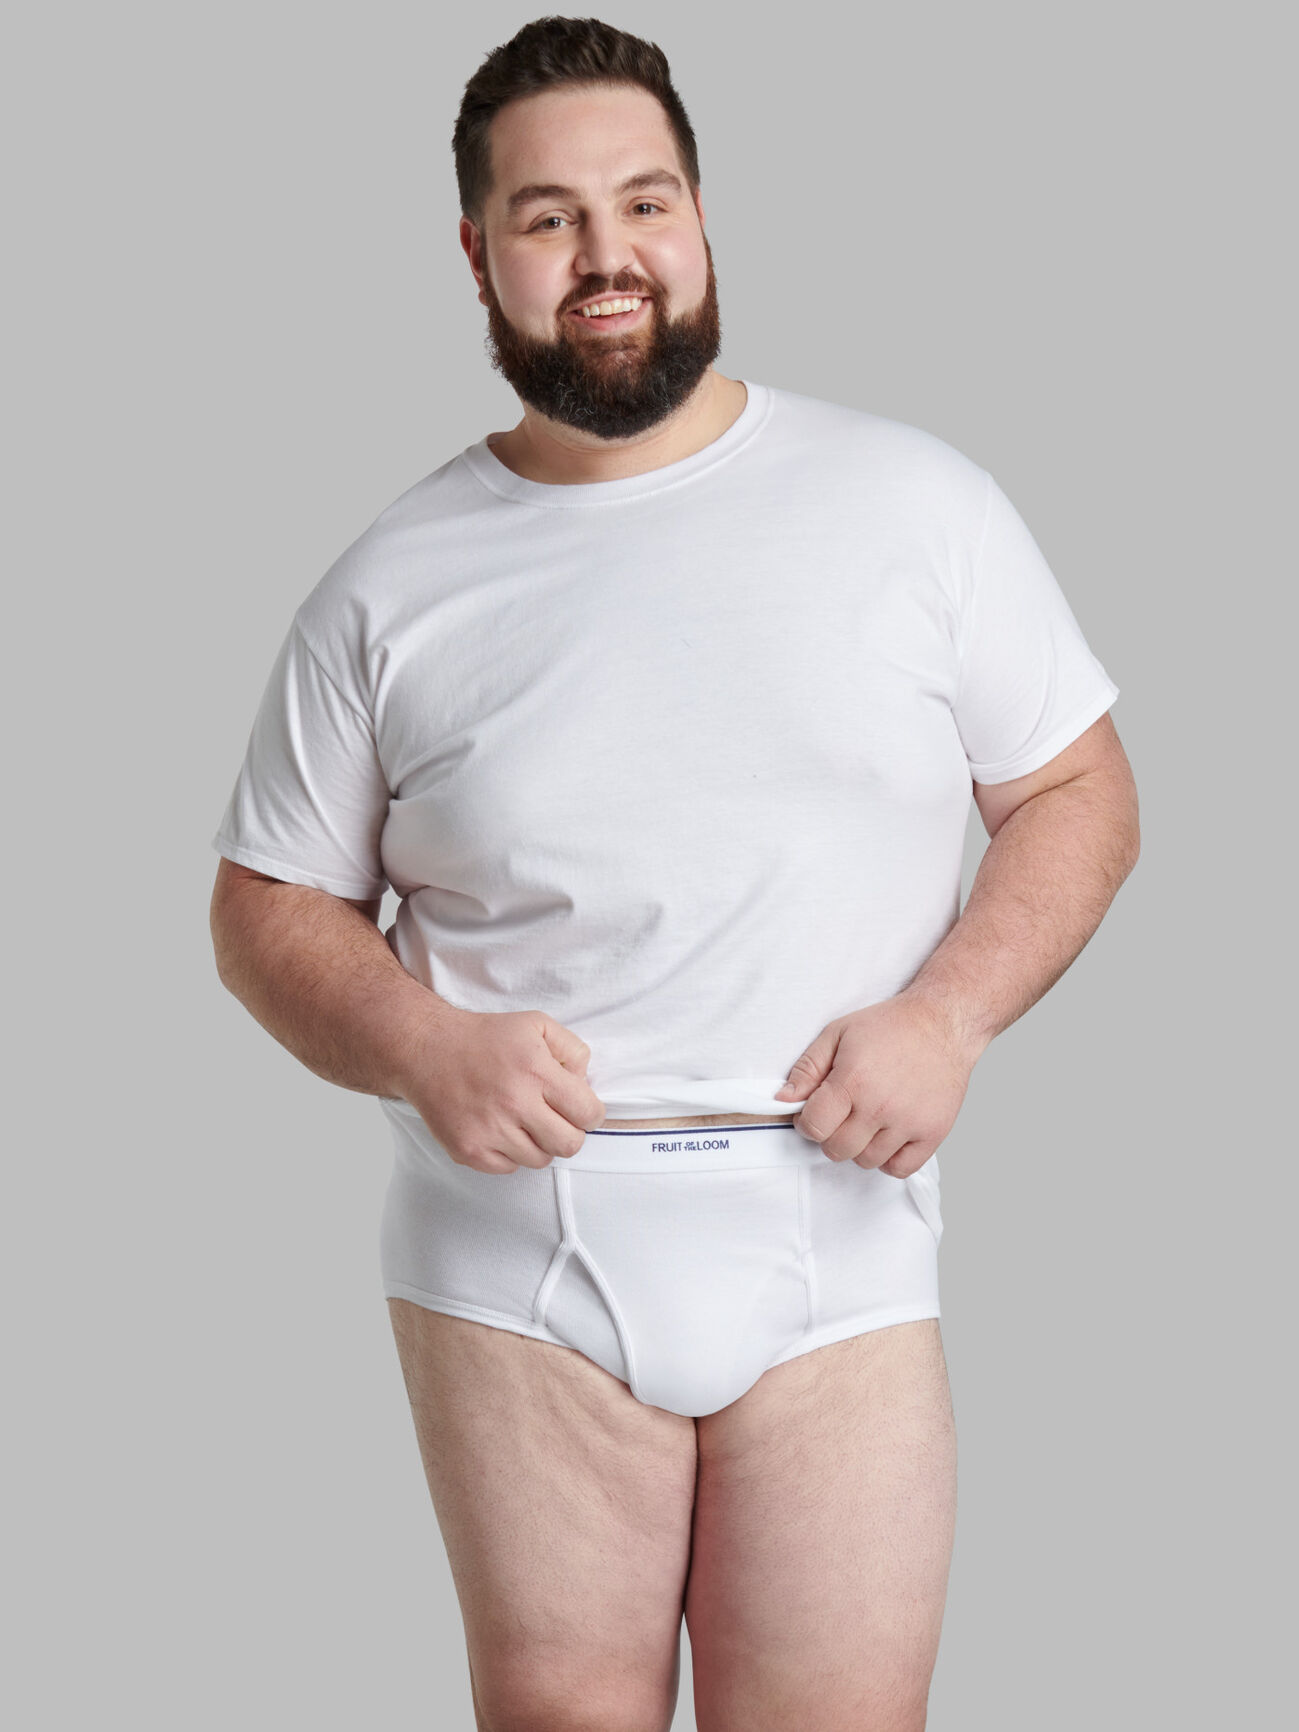 New with no package 3 Pack Men's Fruit of the Loom White Briefs